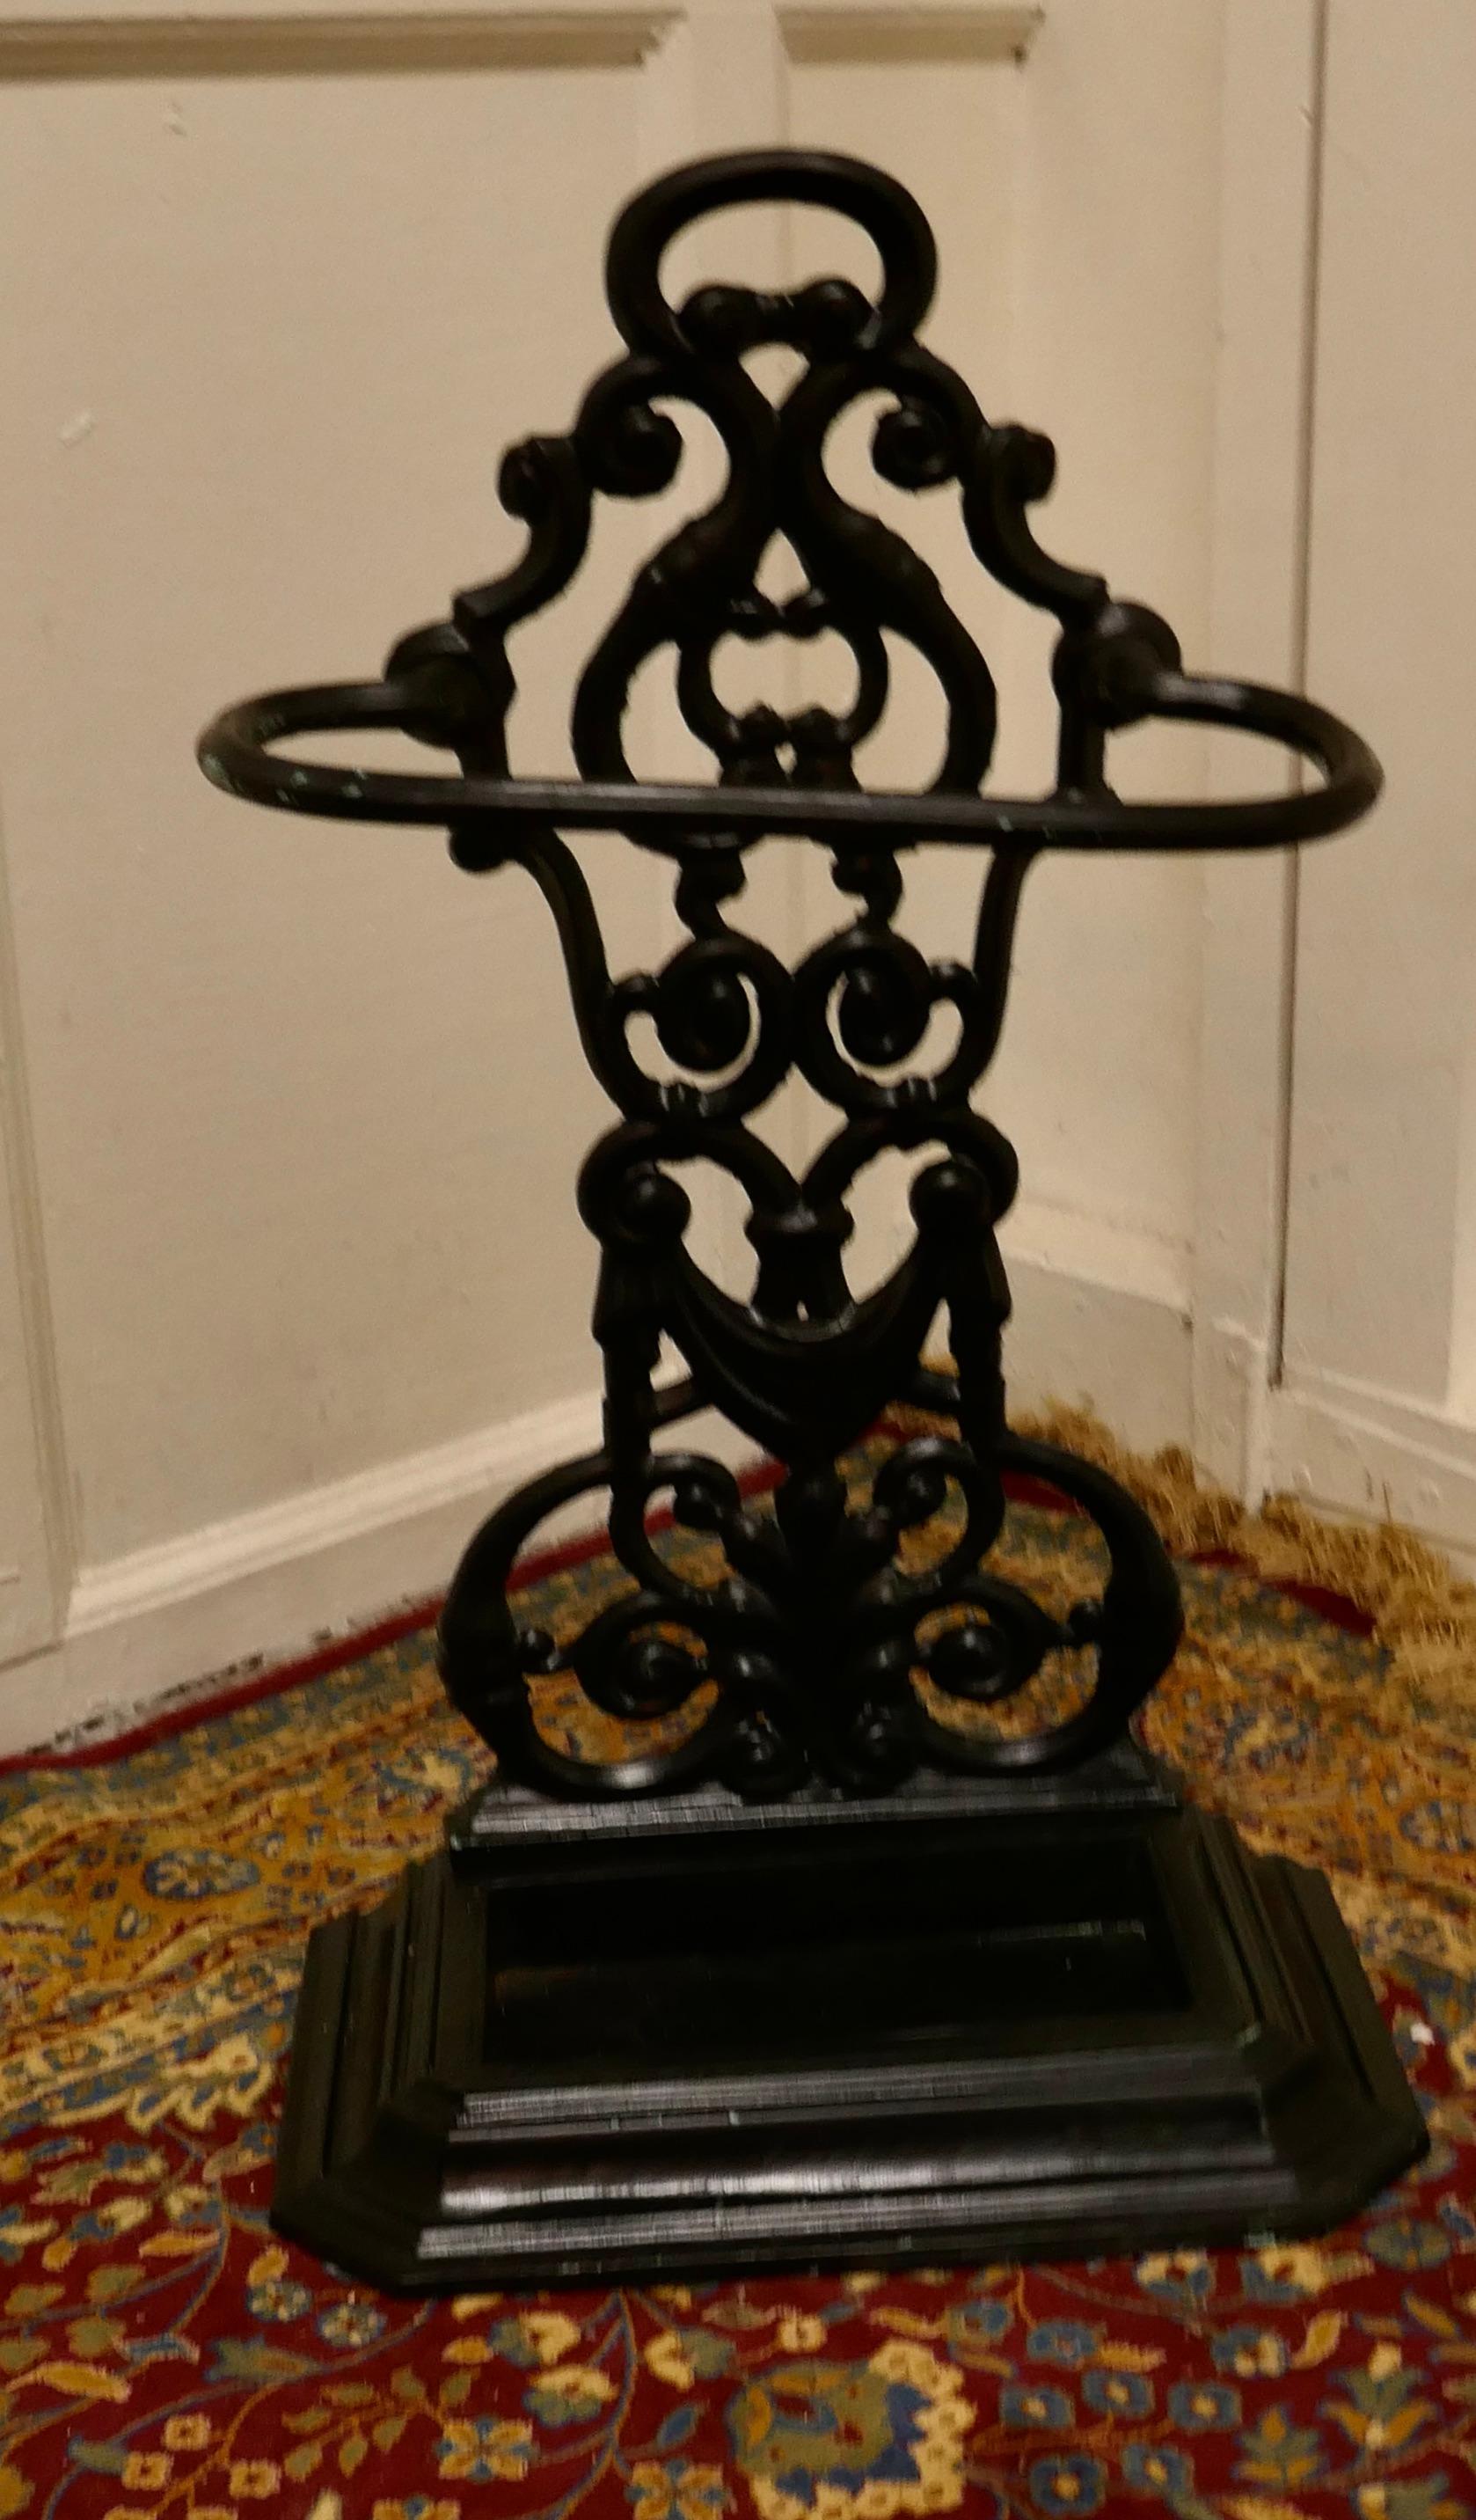 Cast iron umbrella or stick stand

An attractive cast iron stand with a curved support rail and removable umbrella drip tray and a tall decorative back
This hall stand is in great condition and will hold al sort of Umbrellas and Walking